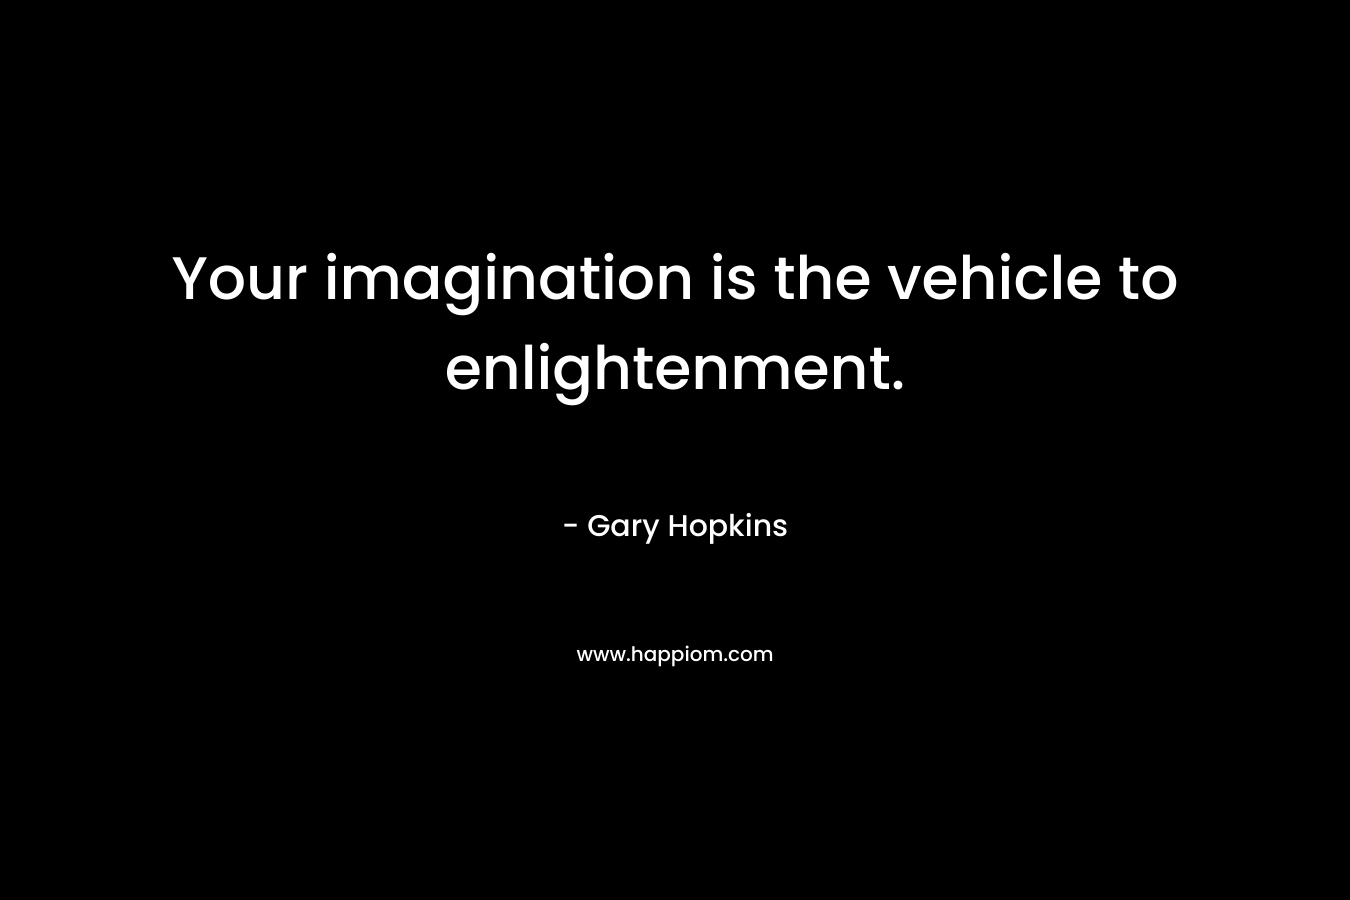 Your imagination is the vehicle to enlightenment.